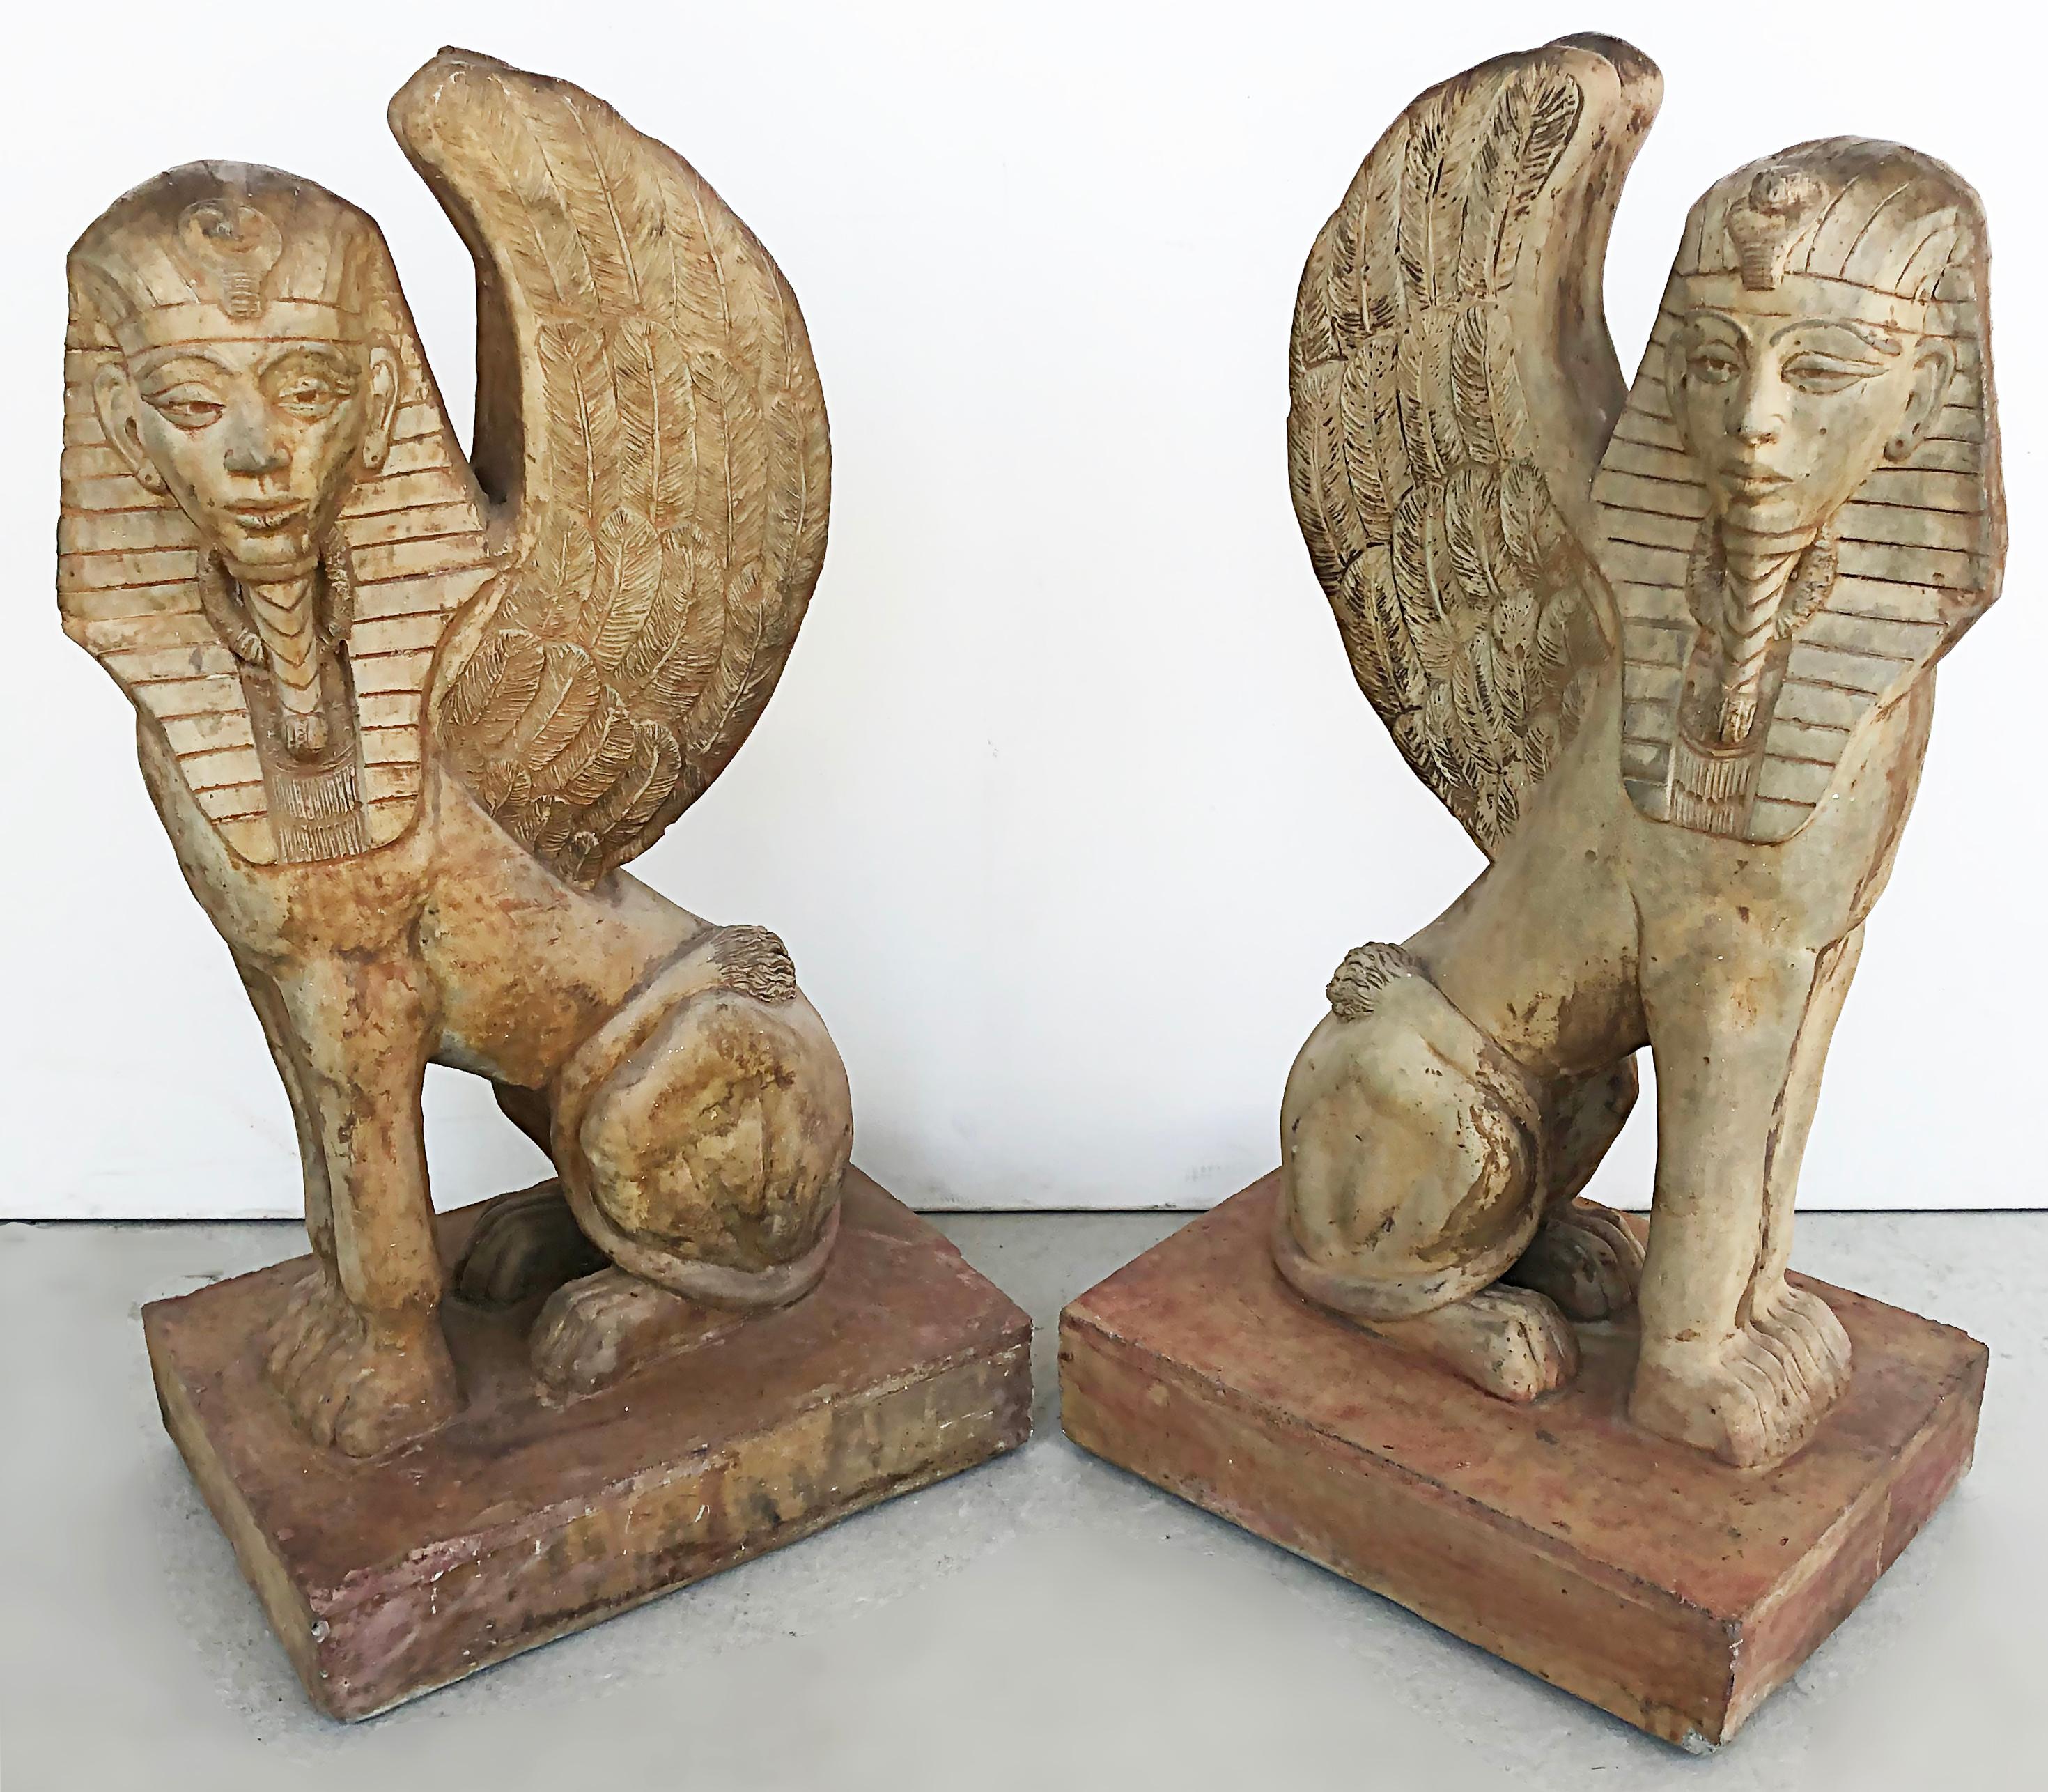 Egyptian Revival Winged Sphinx garden sculptures/ornaments, a pair

Offered for sale is a pair of Egyptian Revival-style winged sphinx garden sculptures/ornaments. The pair is opposing and will look great in a garden or guarding the front door.